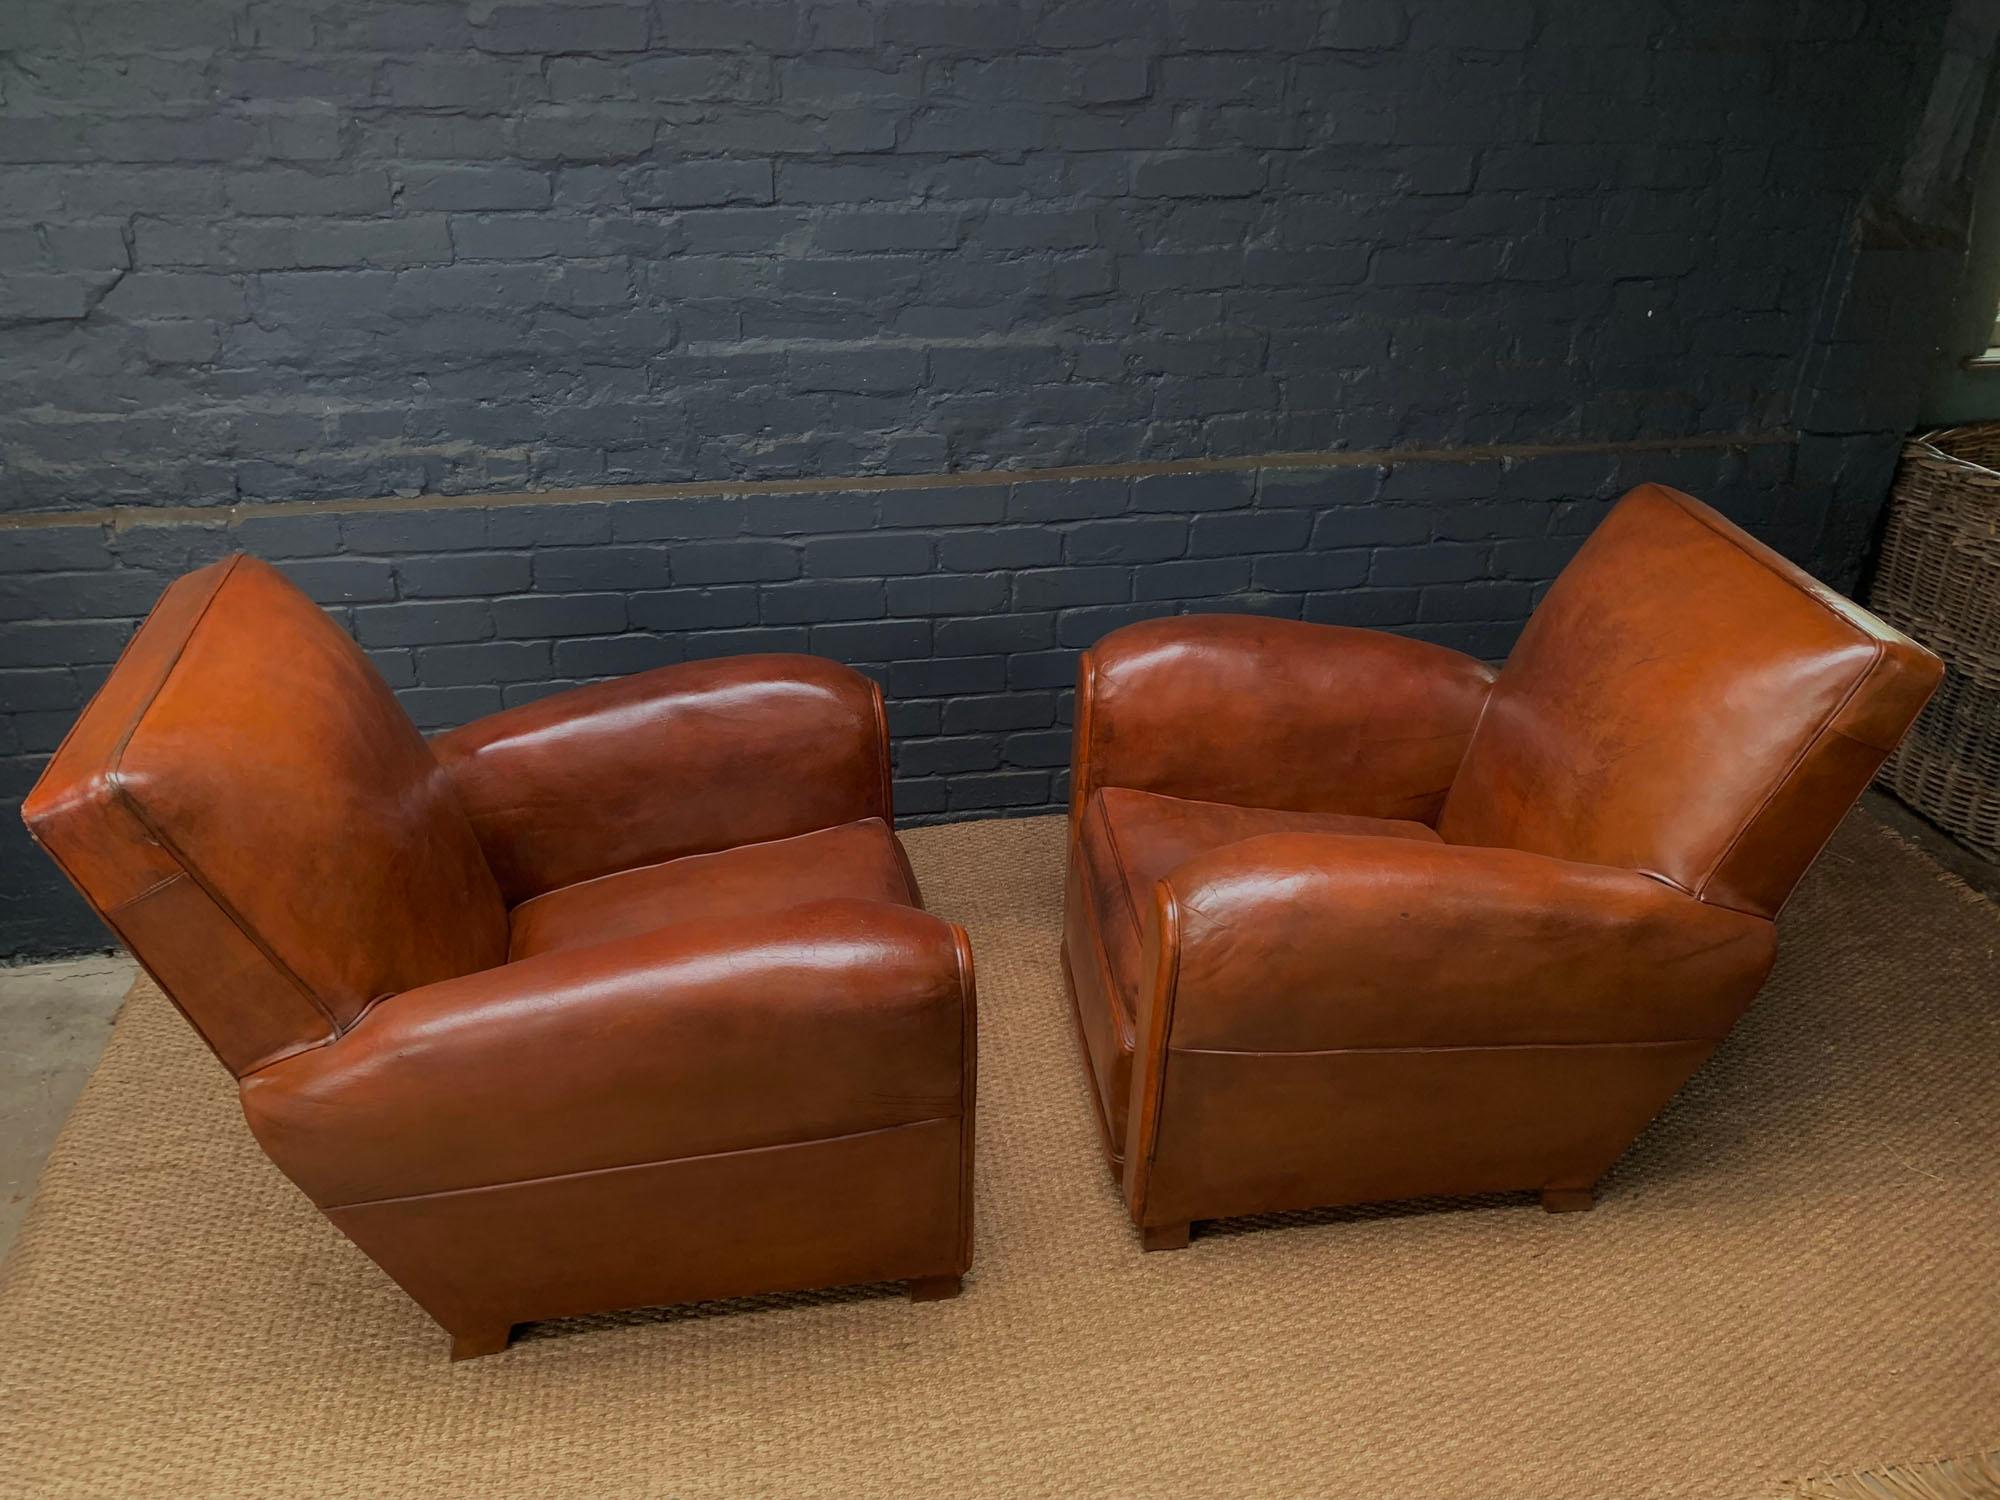 FRENCH LEATHER CLUB CHAIRS 
A classic pair of French leather club chairs produced in France in the 1920s, good strong original leather has been treated and strengthen using conditioner and oils, these chairs are in great condition with very minimal